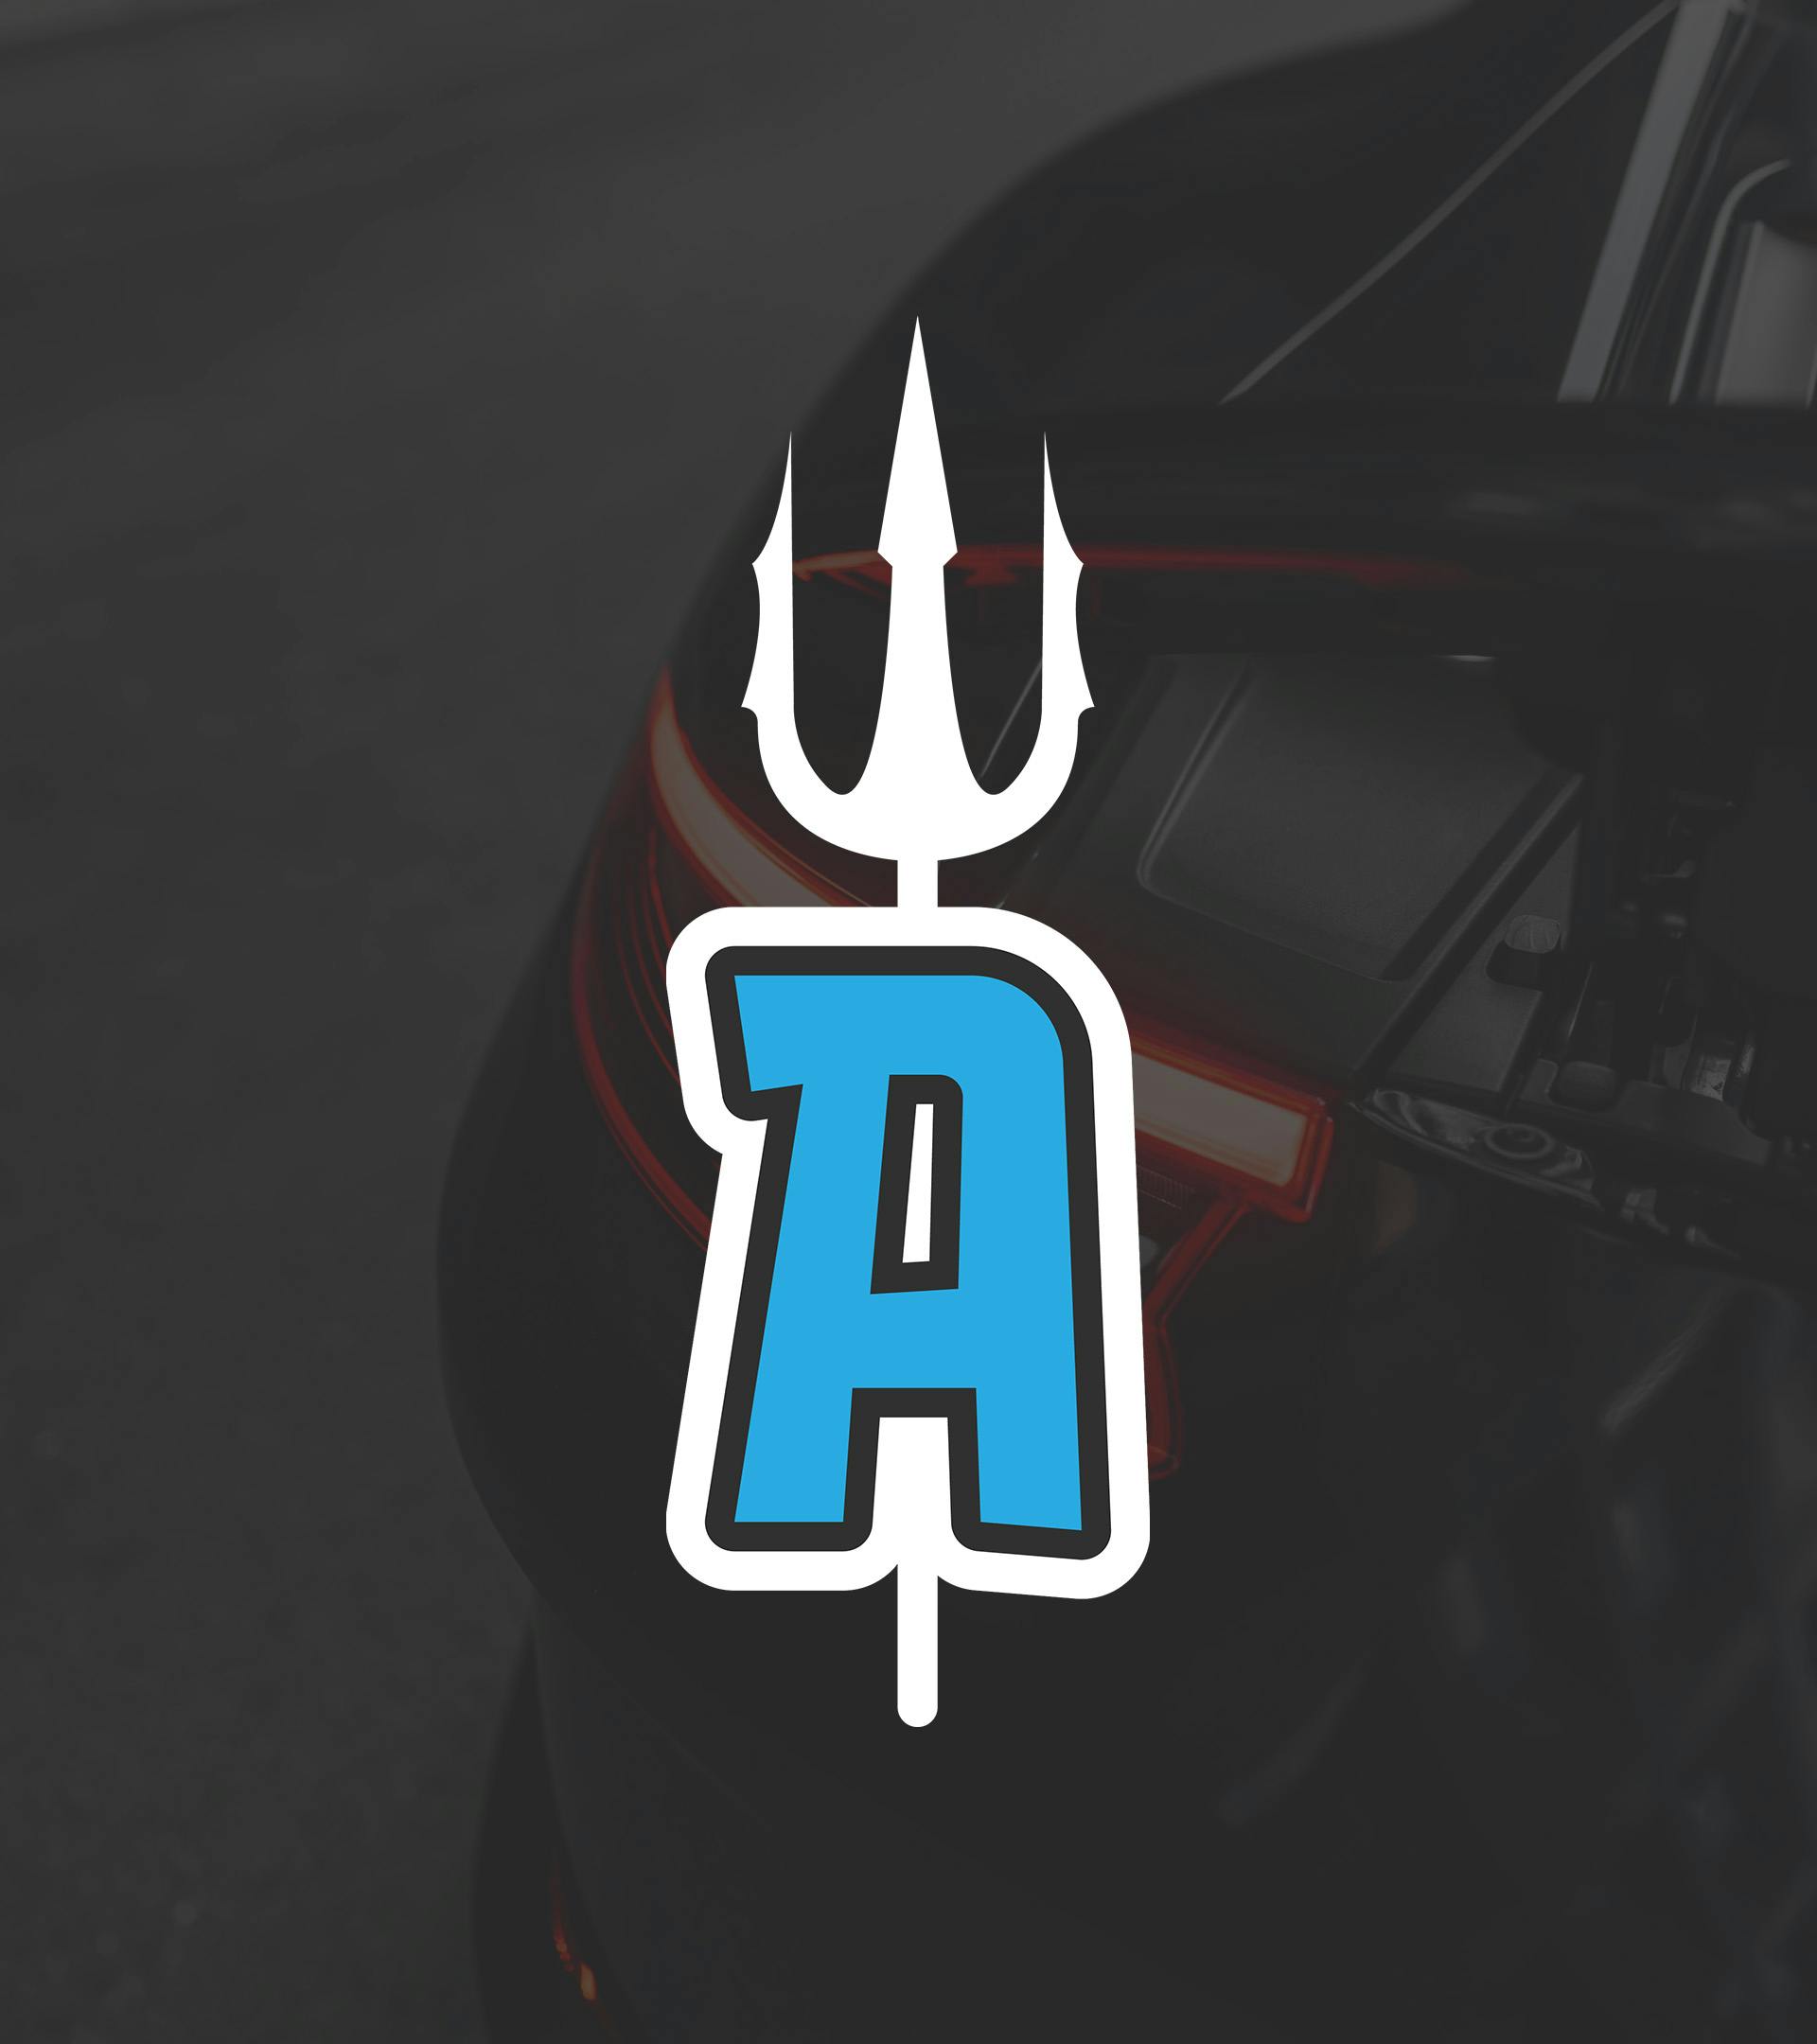 Aquamen icon with a car taillight in the background